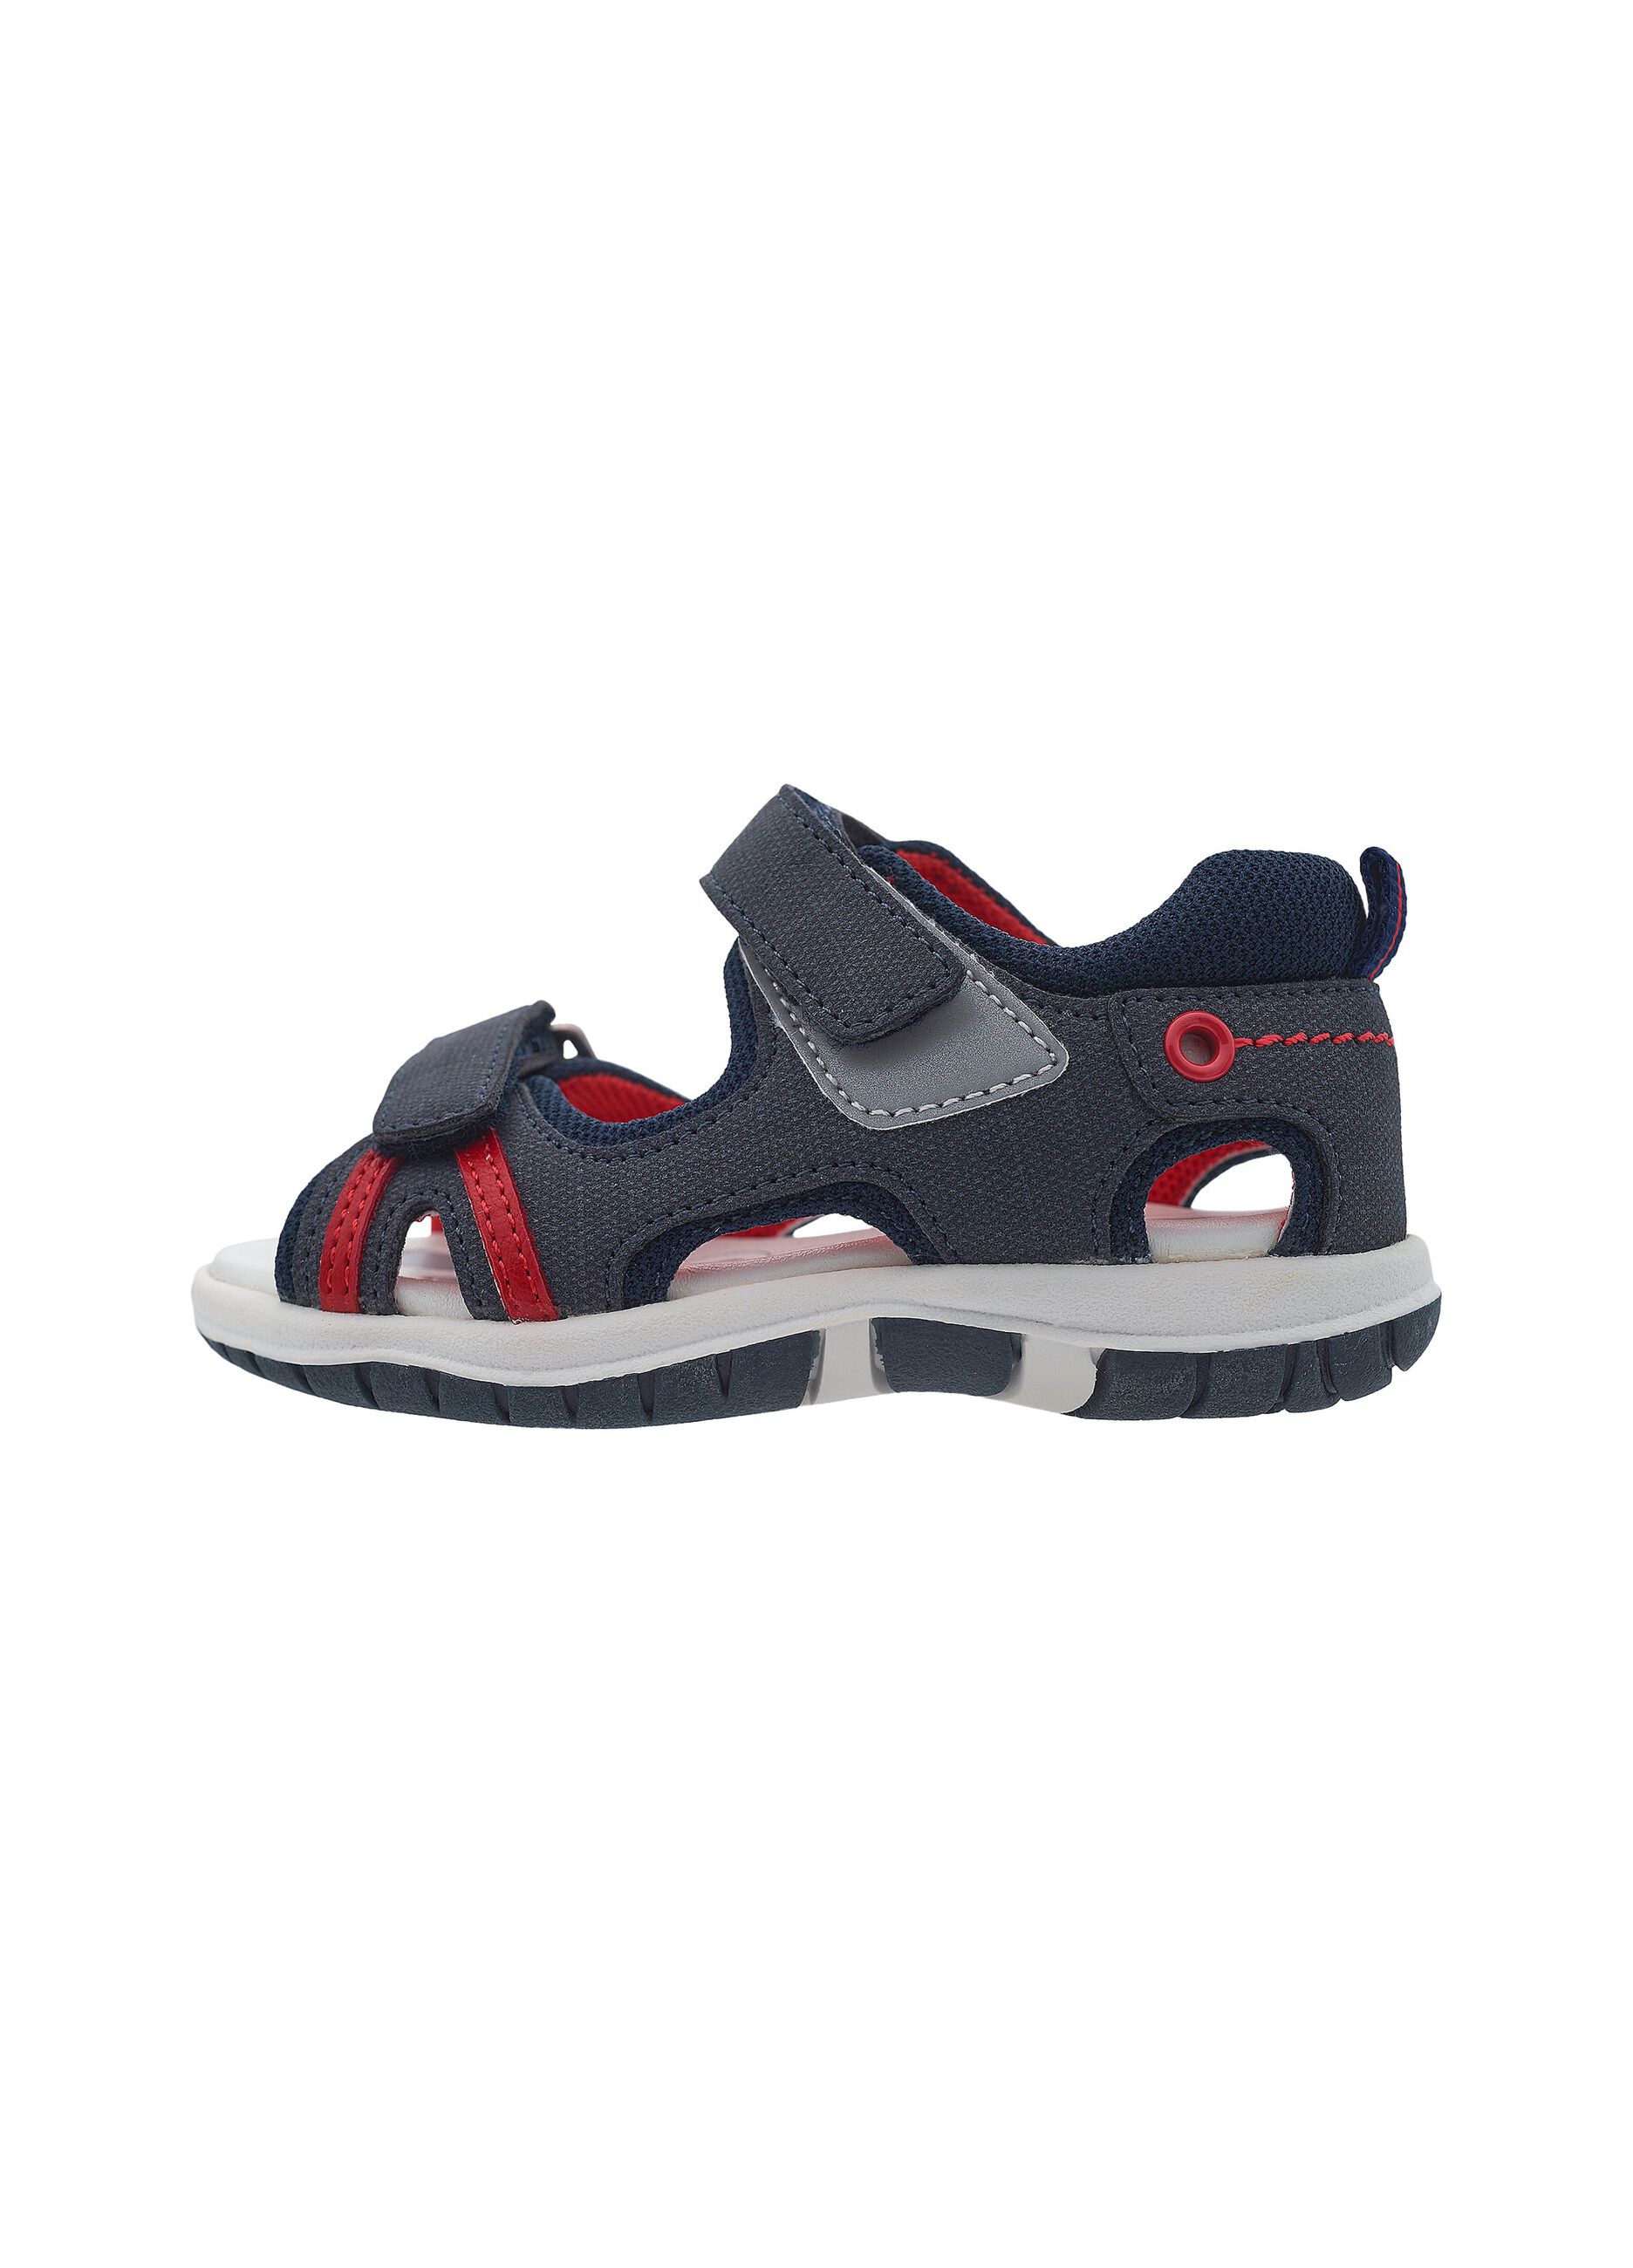 Forrest sandals with double Velcro strap